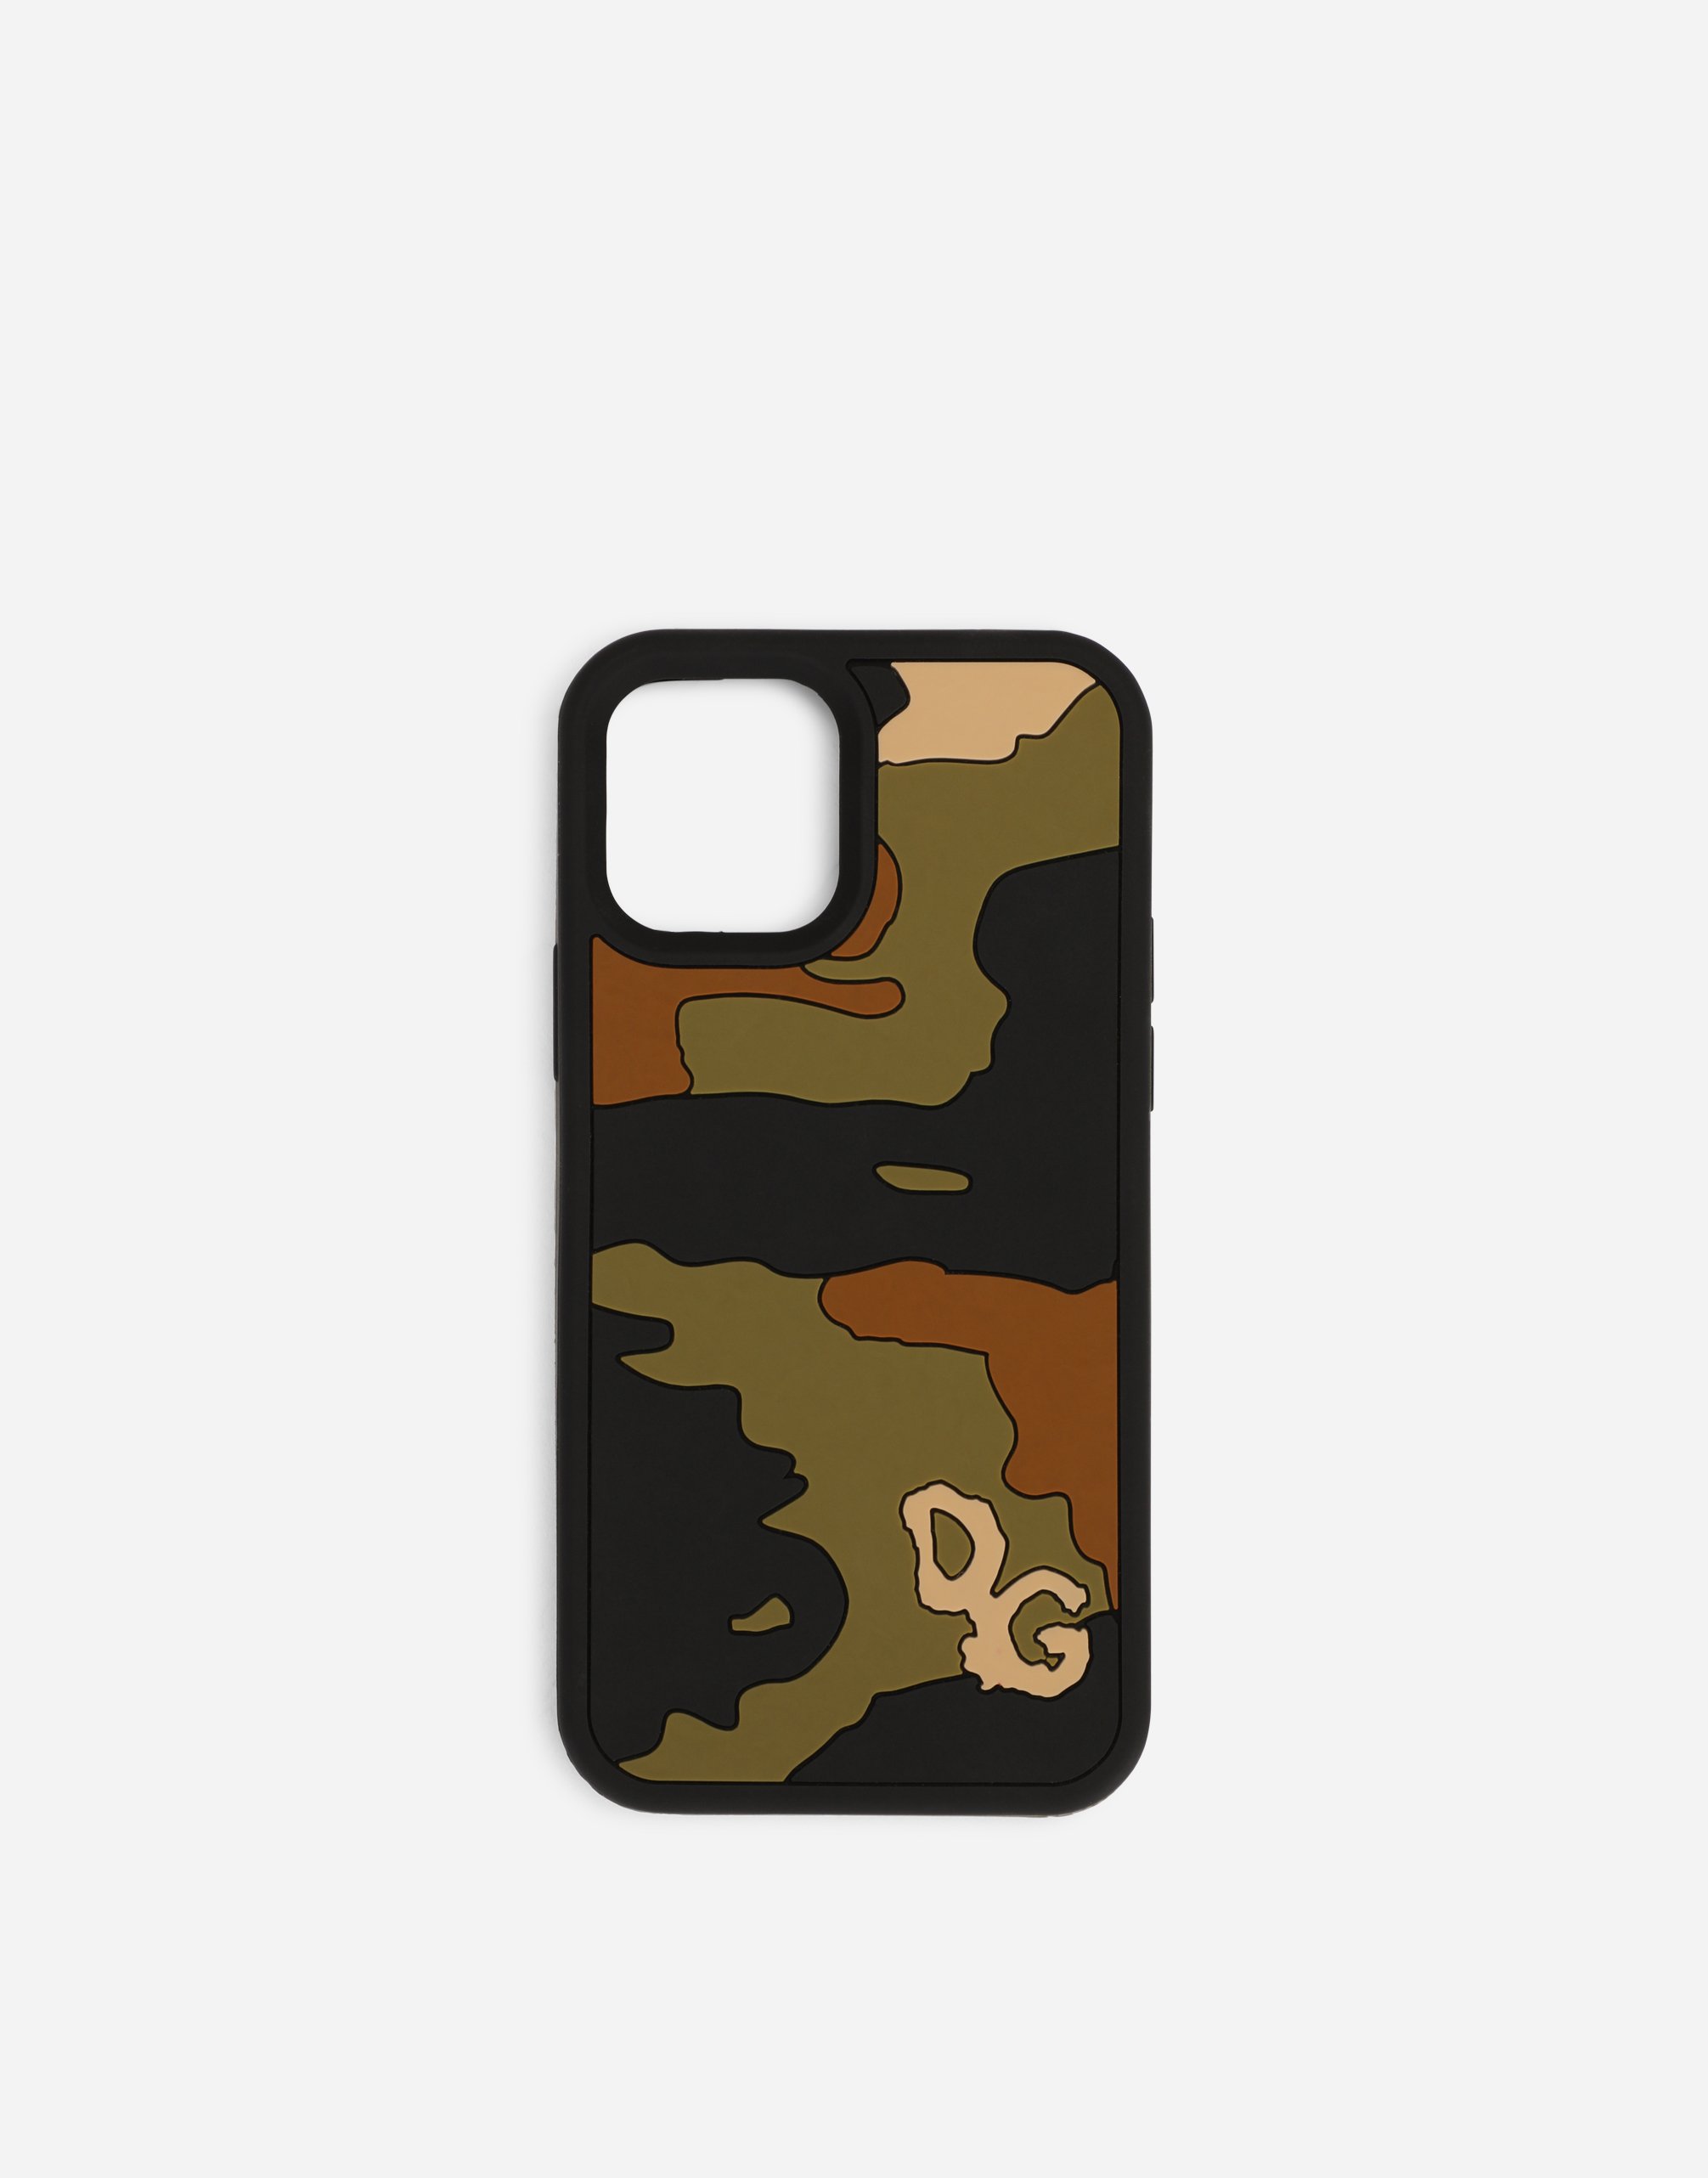 Camouflage rubber iPhone 12 Pro cover in Multicolor